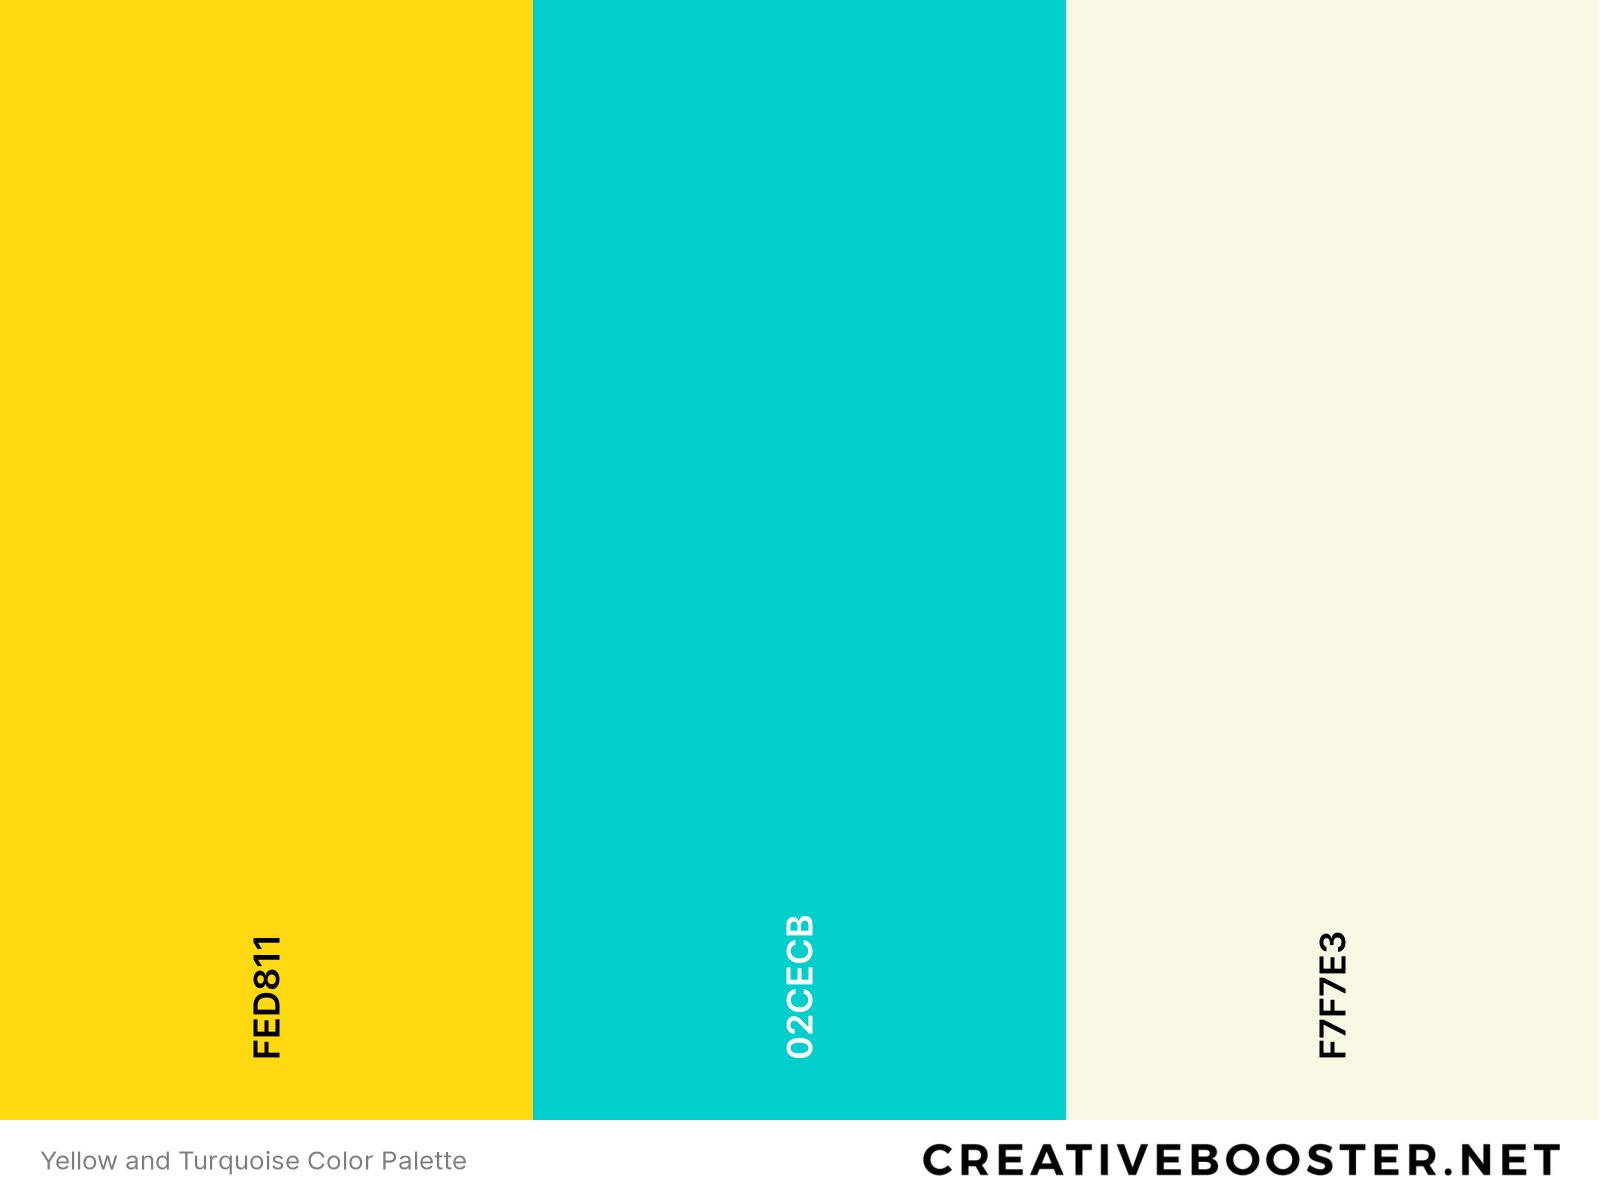 Yellow and Turquoise Color Palette